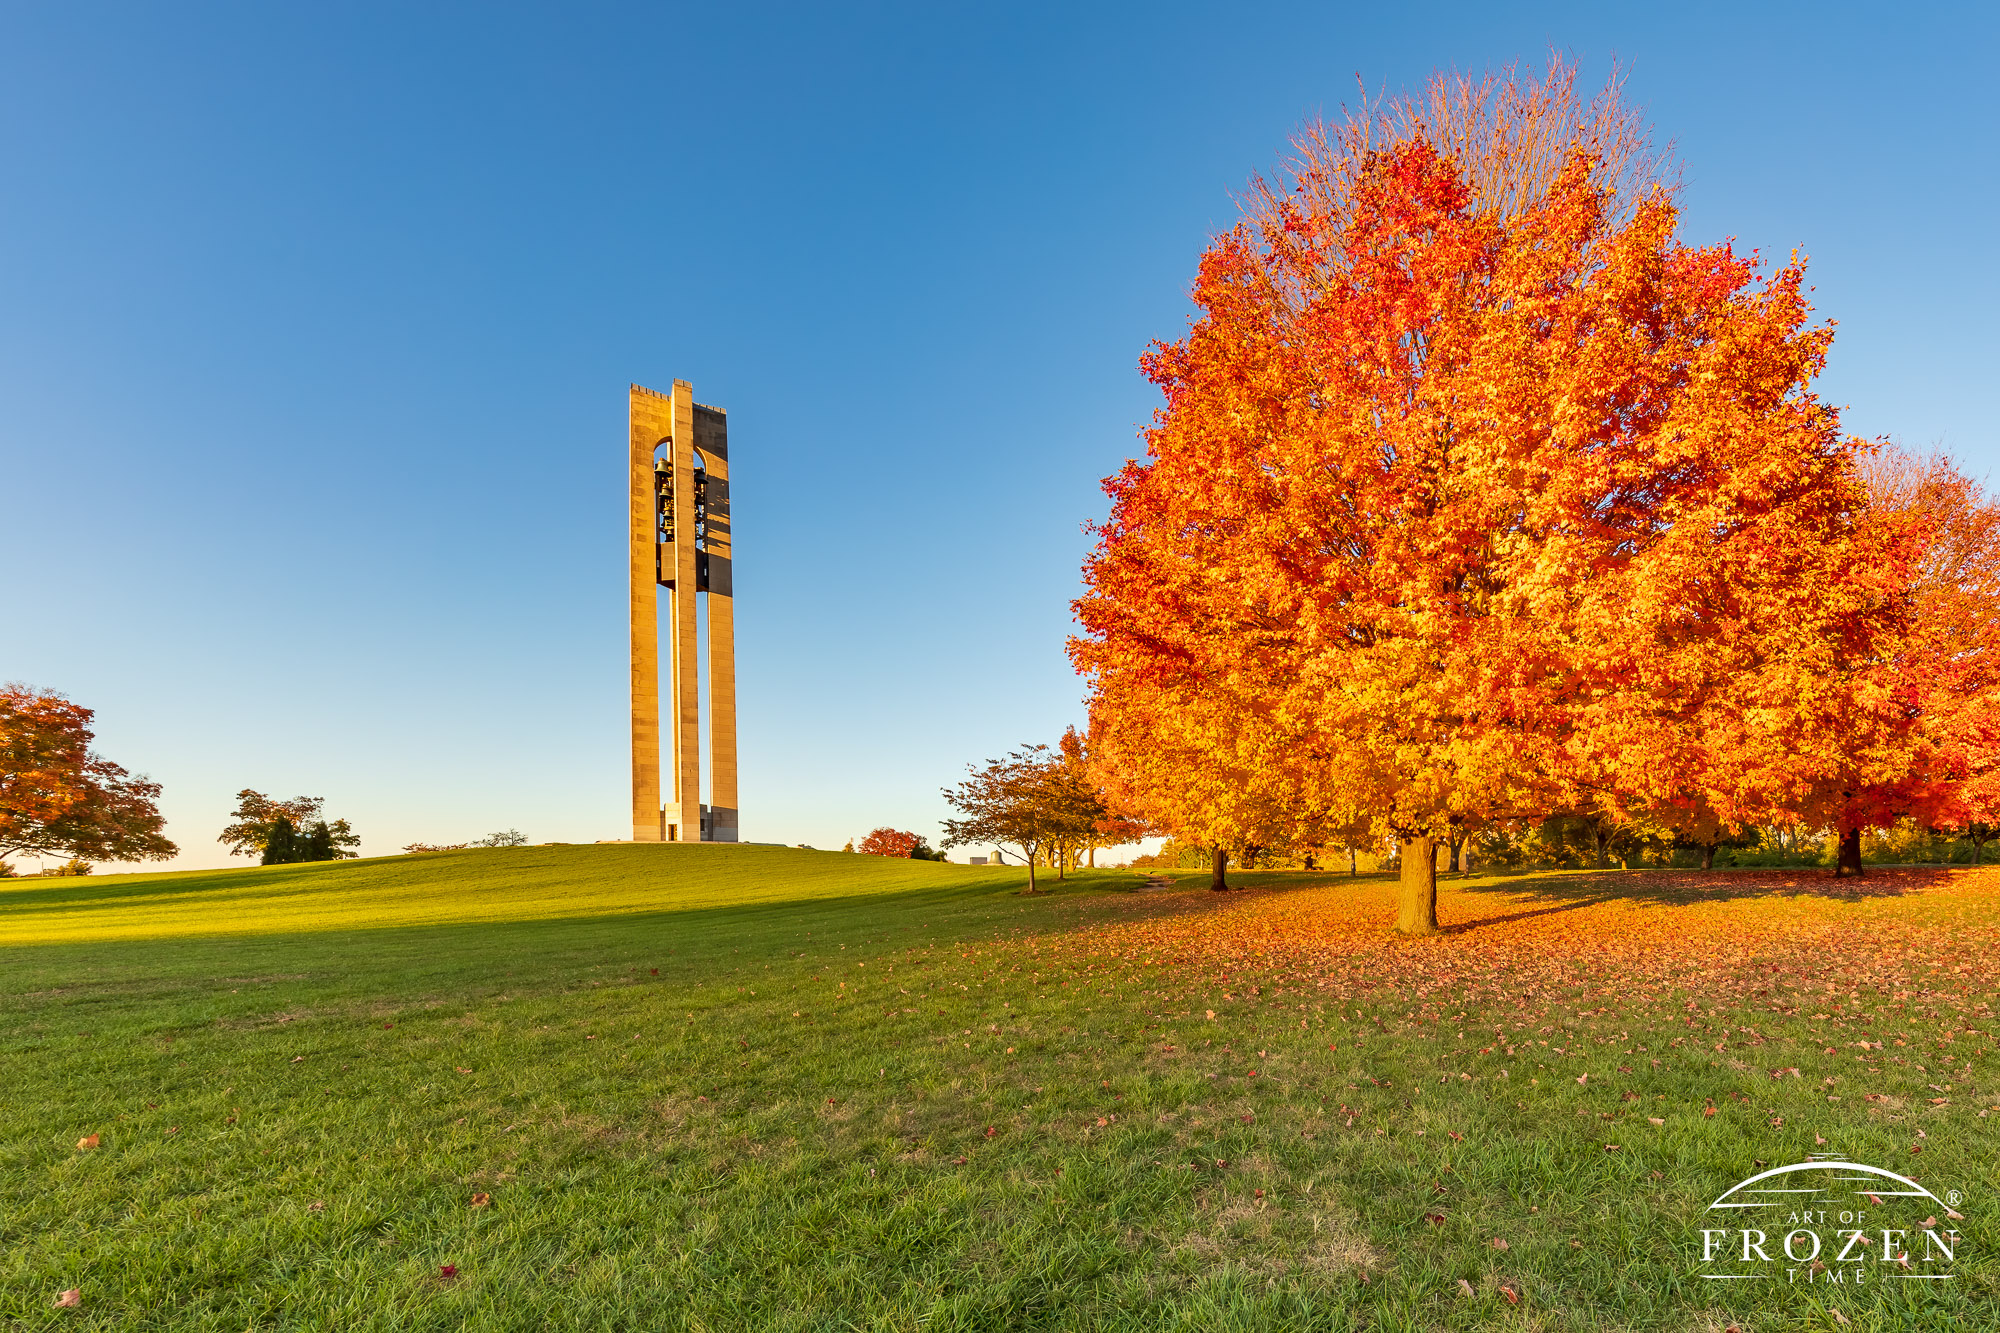 Deeds Carillon gently painted in gold light as autumn colored leaves seem to glow on this fall evening.